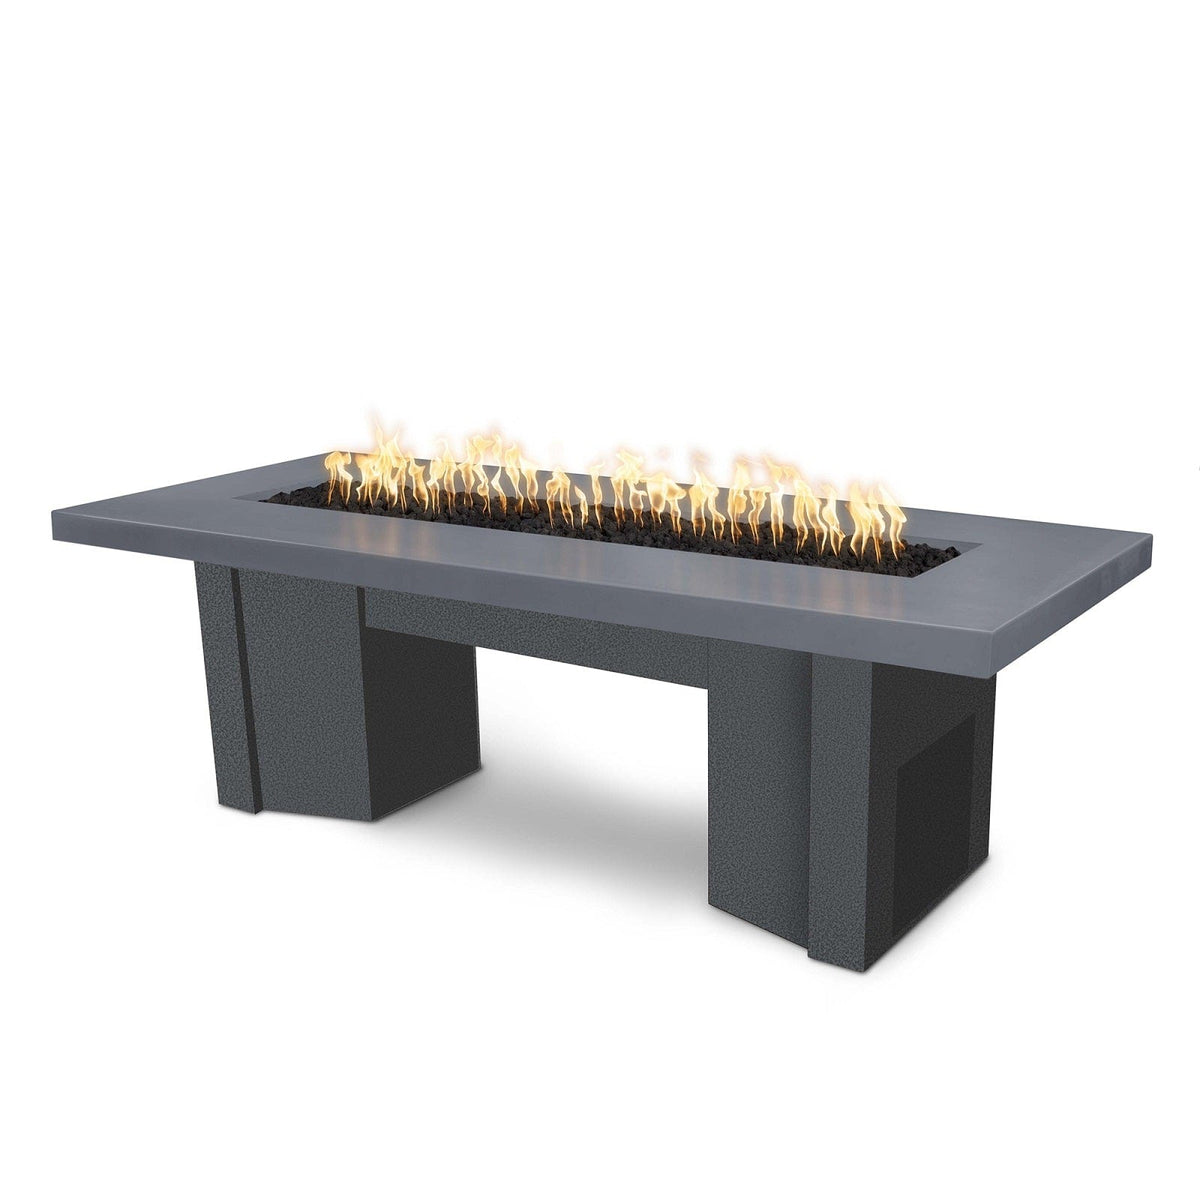 The Outdoor Plus Fire Features Gray (-GRY) / Silver Vein Powder Coated Steel (-SLV) The Outdoor Plus 78&quot; Alameda Fire Table Smooth Concrete in Natural Gas - 110V Plug &amp; Play Electronic Ignition / OPT-ALMGFRC78EKIT-NG